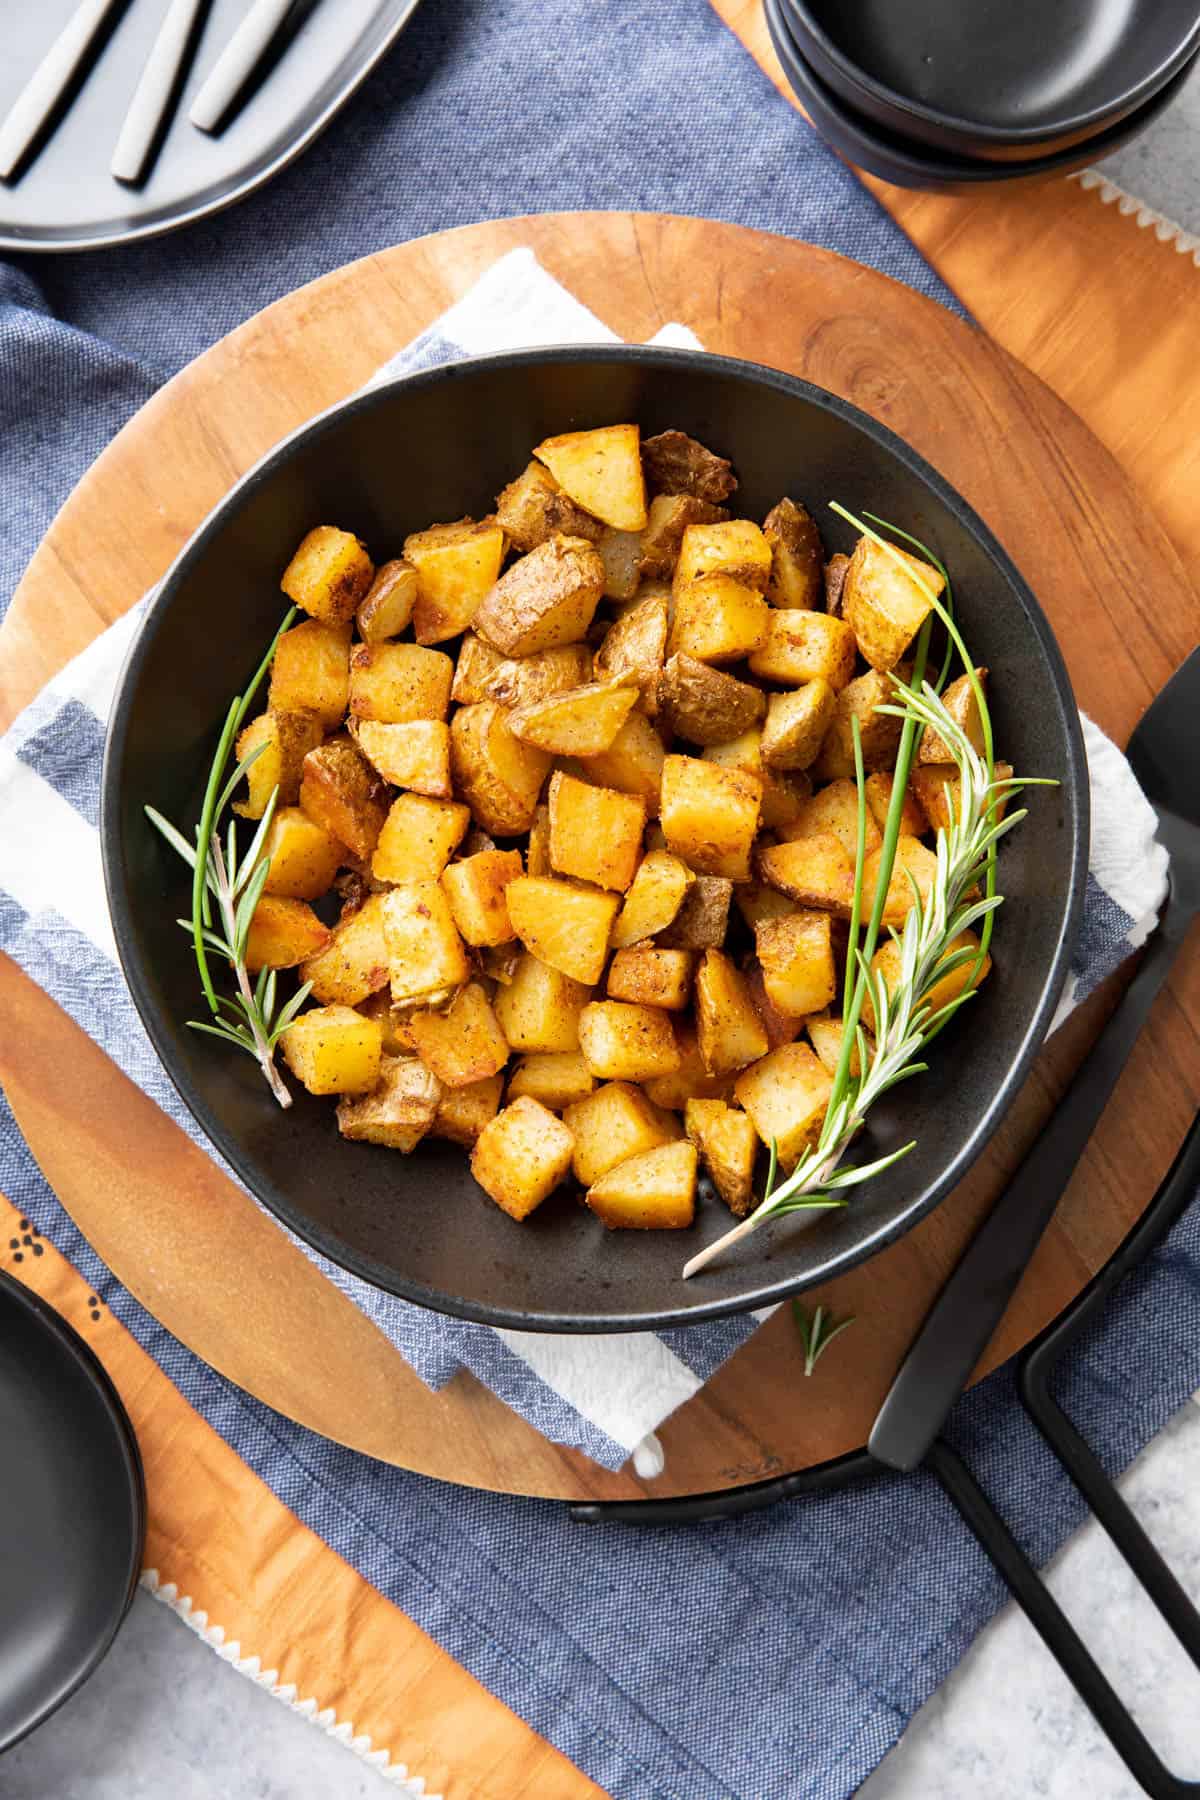 Crispy breakfast potatoes served with rosemary on a dining table